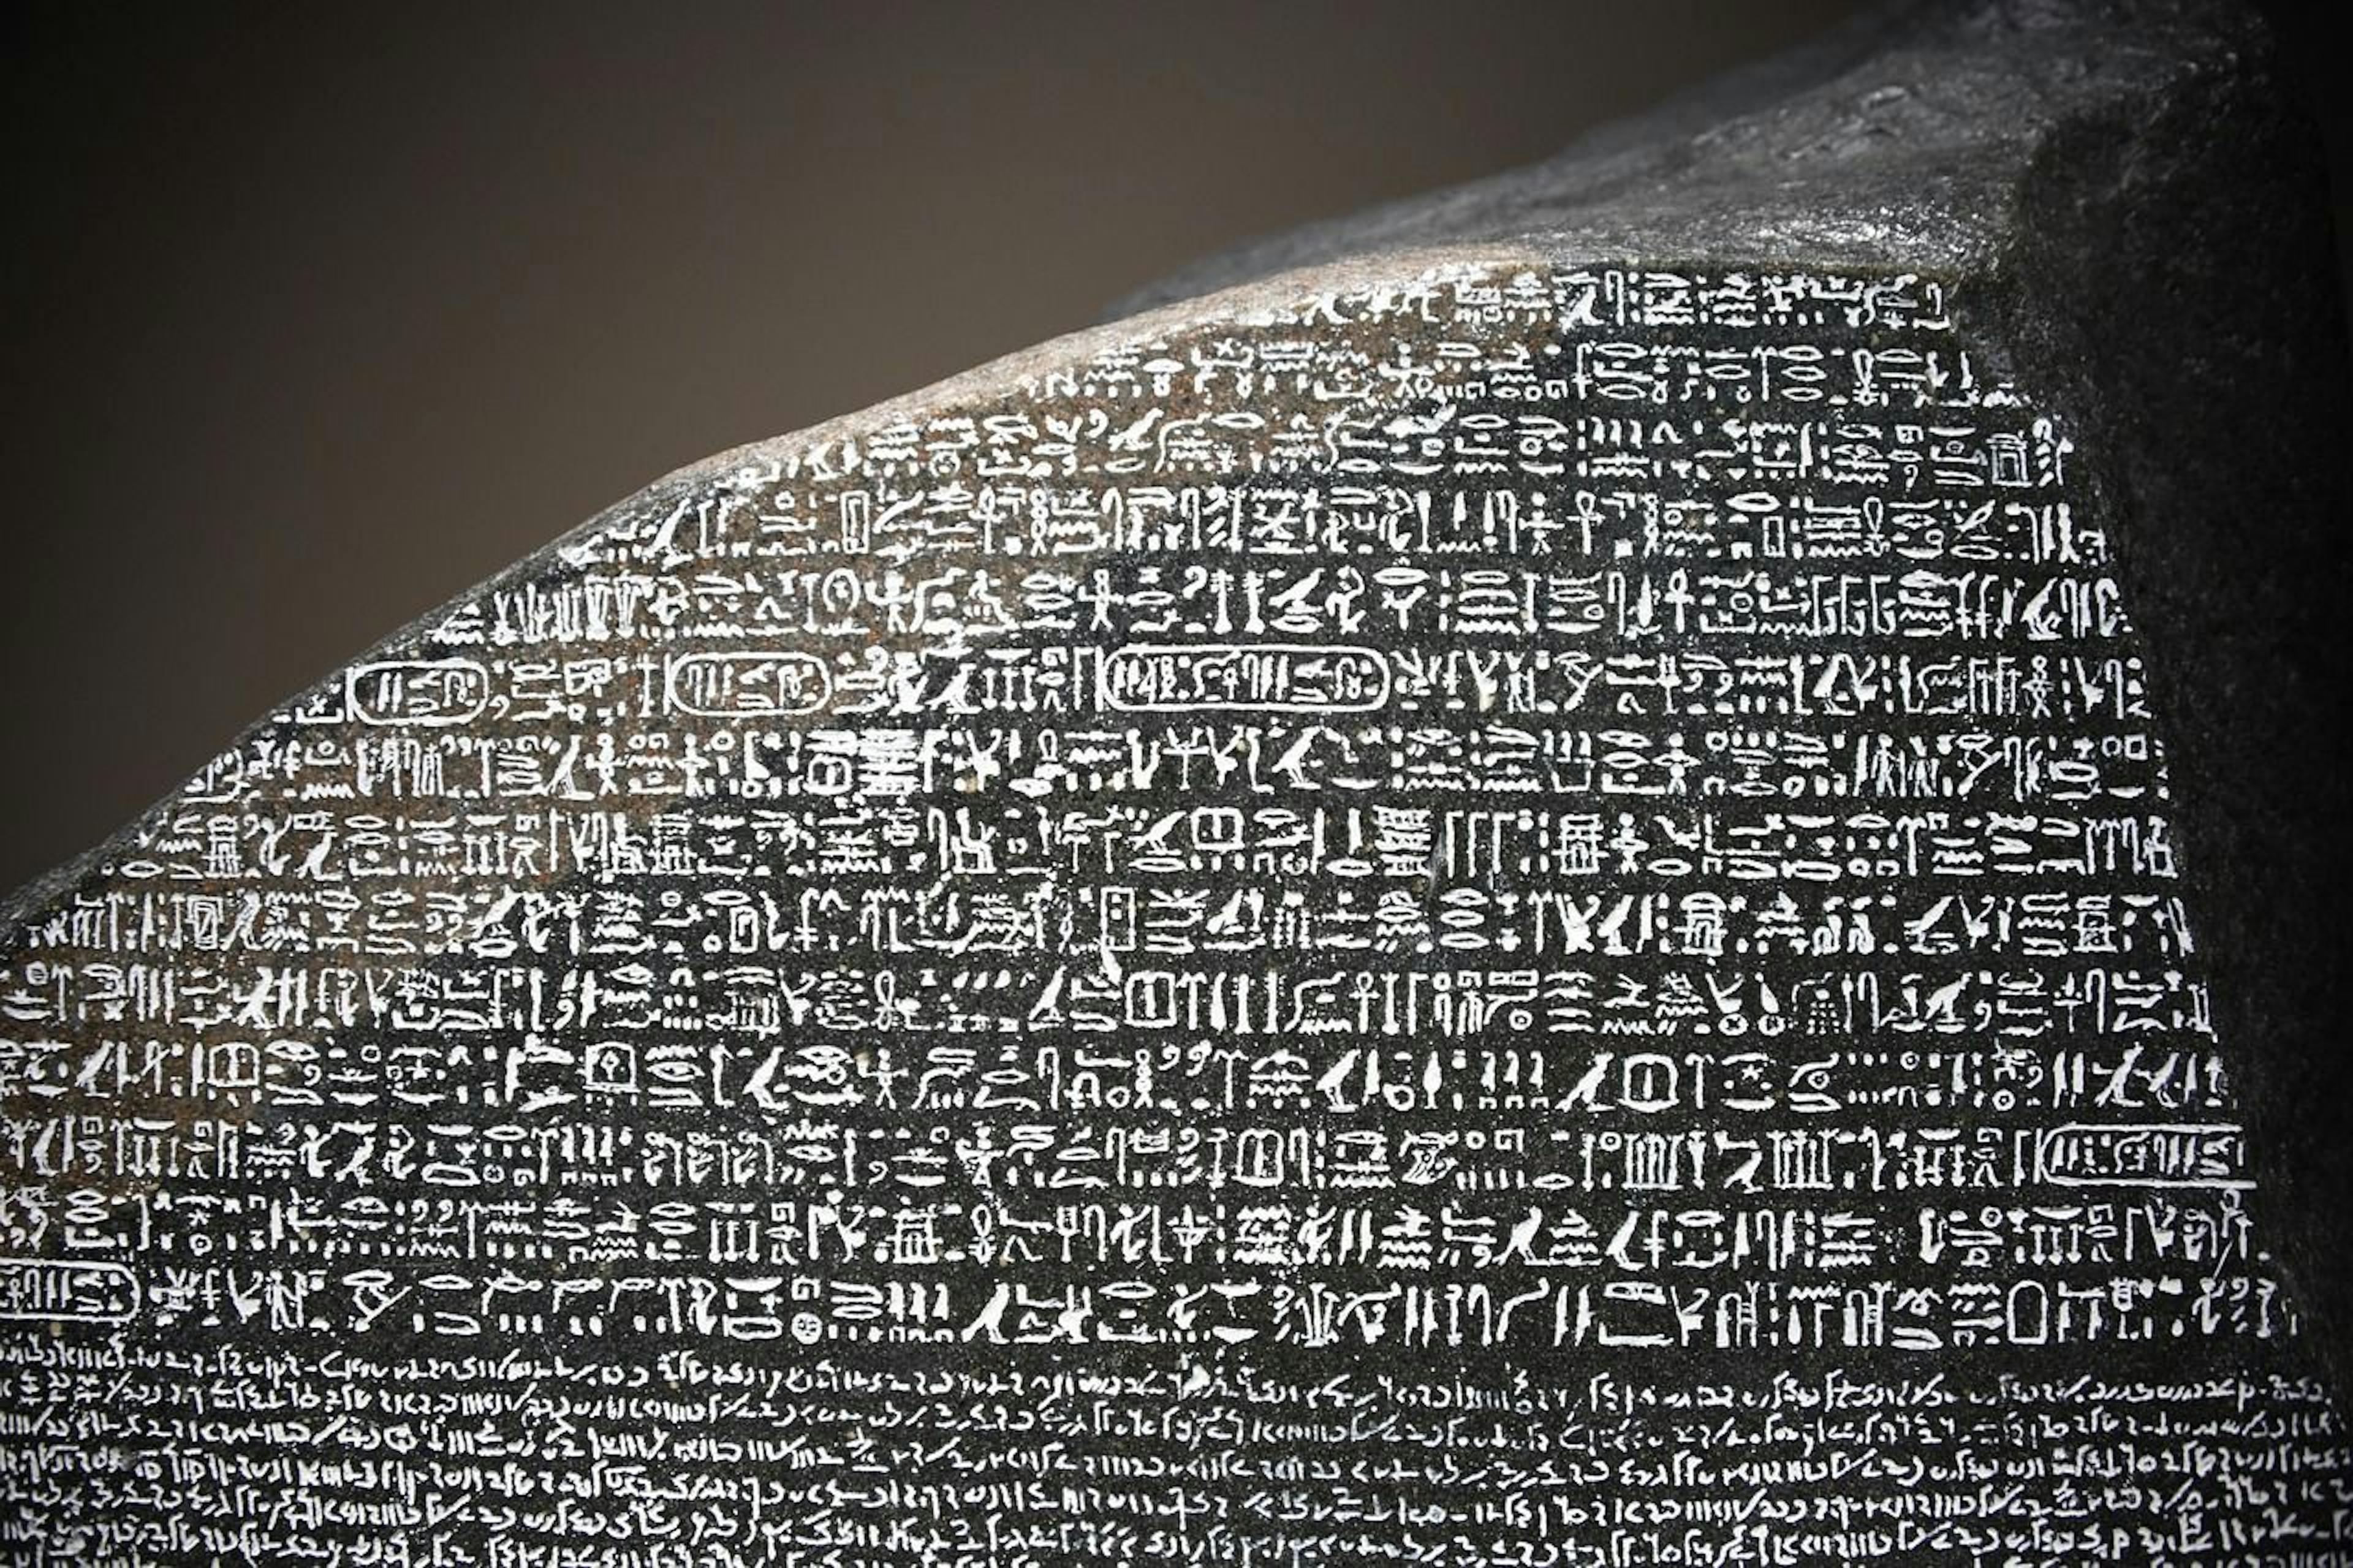 featured image - Towards a Rosetta Stone for (meta)data: Conclusion, Acknowledgements, & References